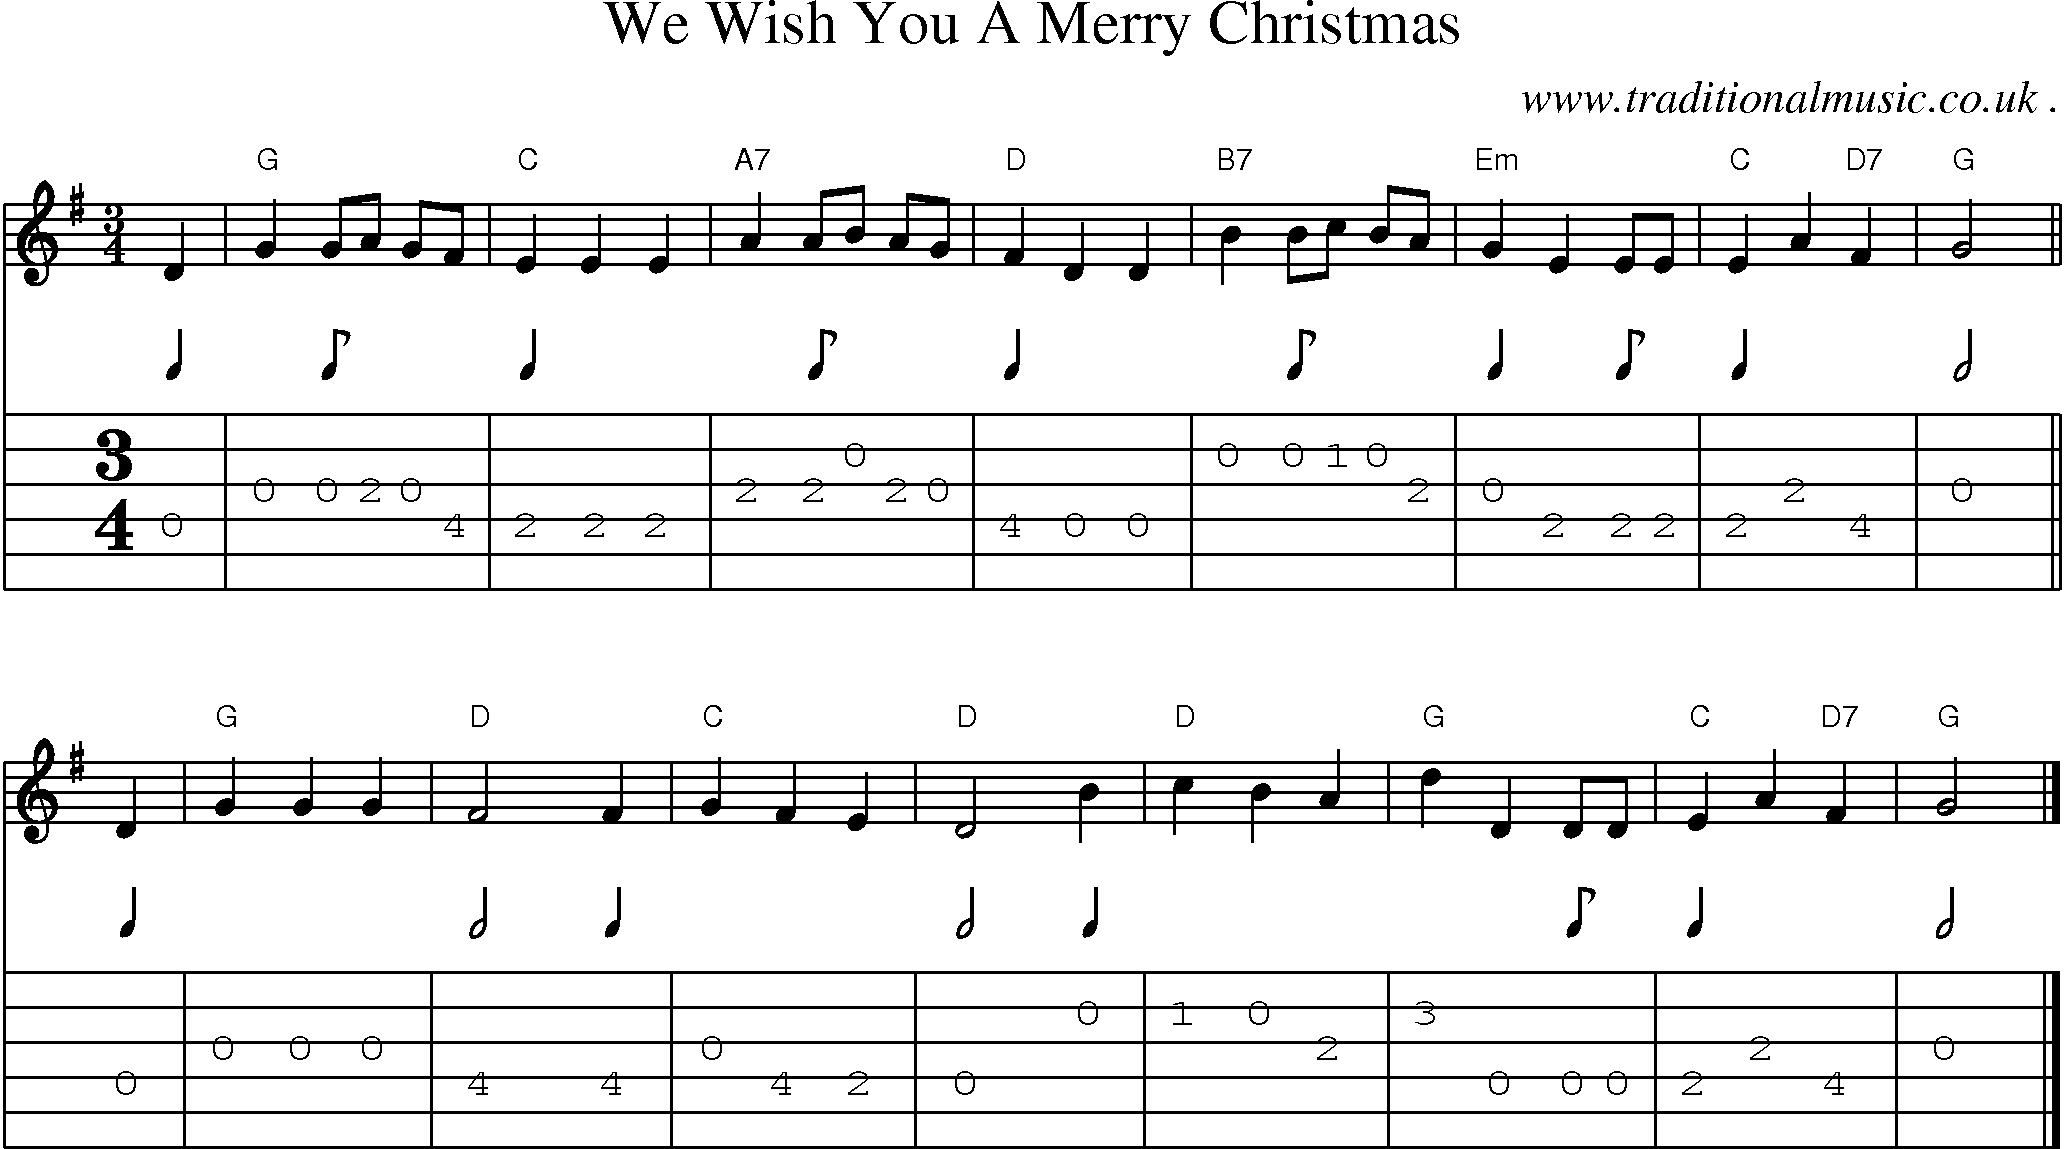 Sheet-music  score, Chords and Guitar Tabs for We Wish You A Merry Christmas